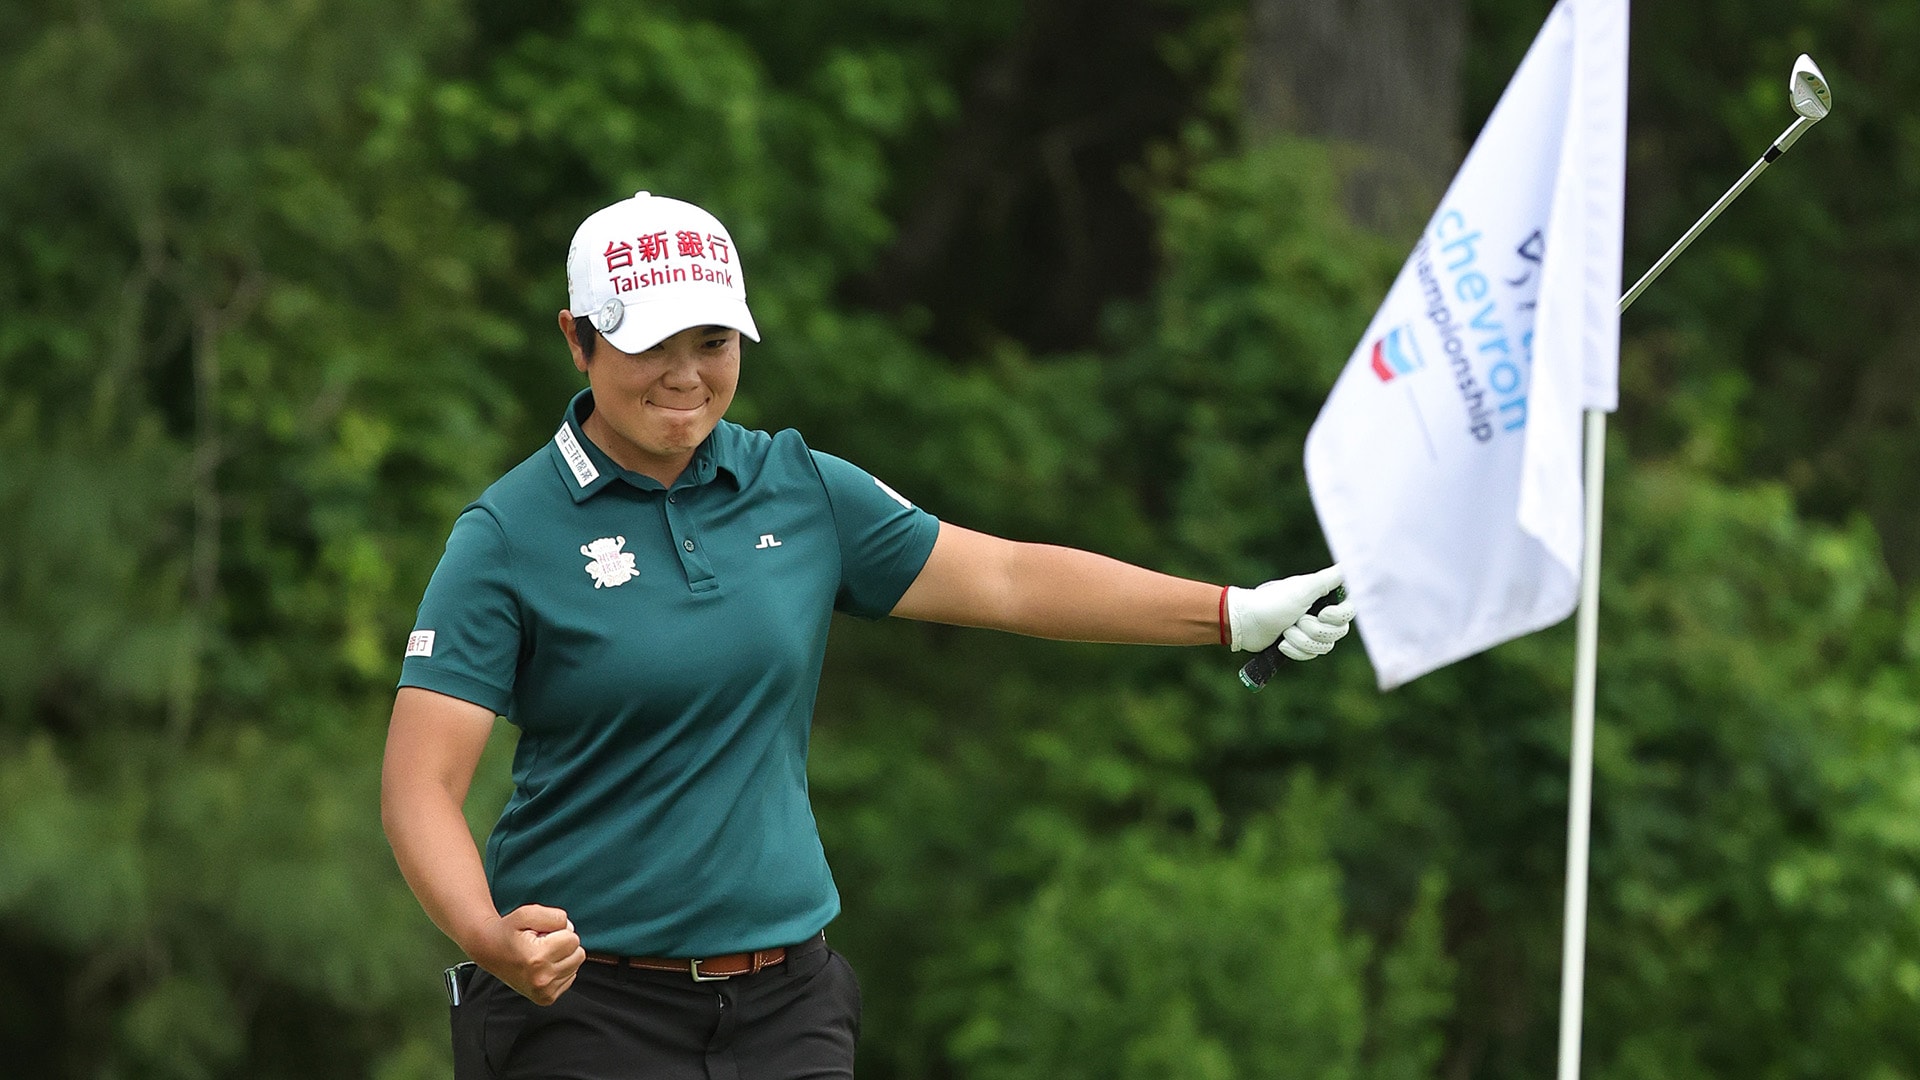 Peiyun Chien leads Chevron Championship, Nelly Korda tied for 2nd